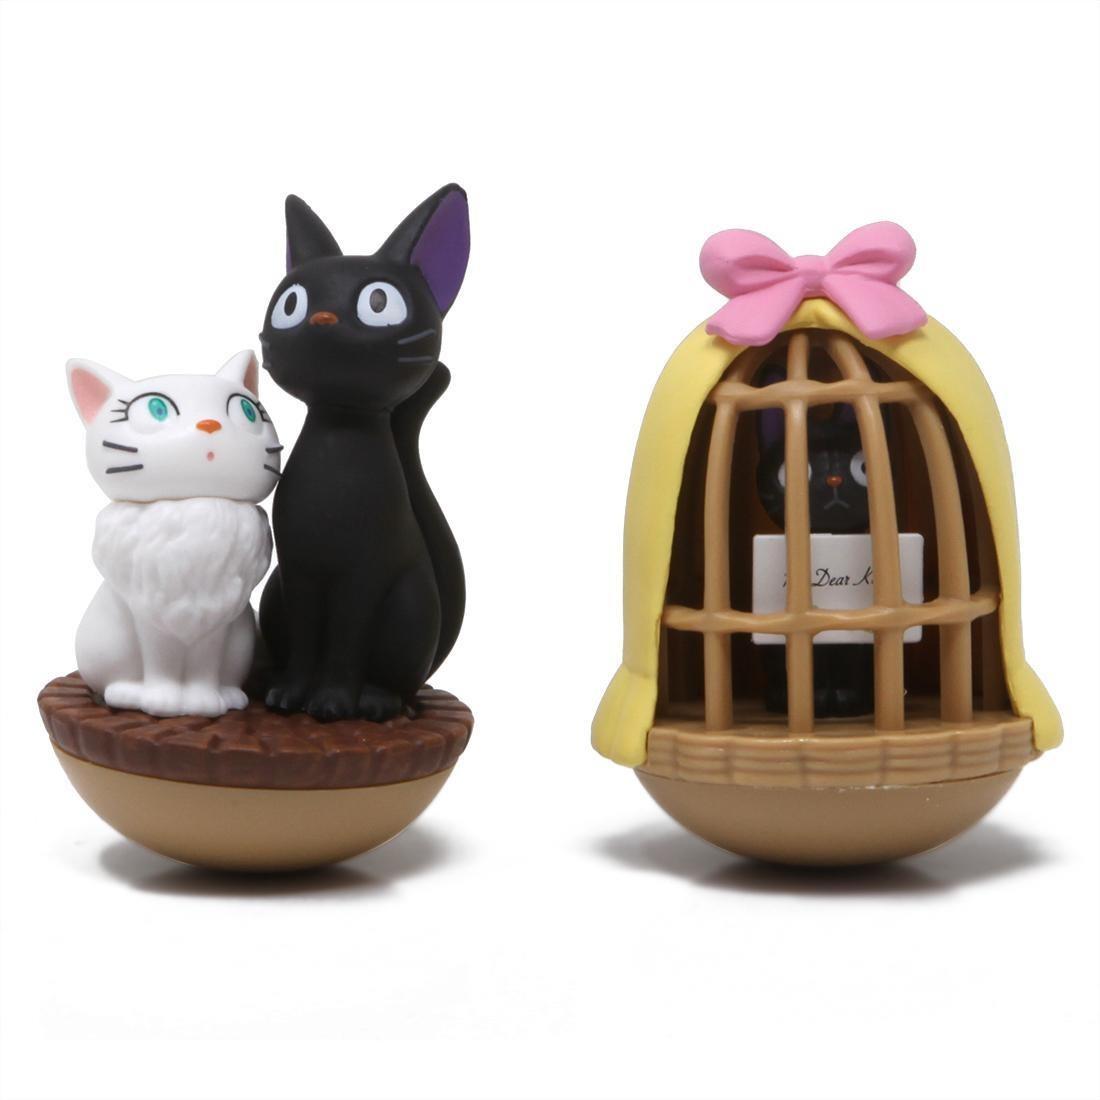 Kiki's Delivery Service: Jiji and Lily Tilting Figures